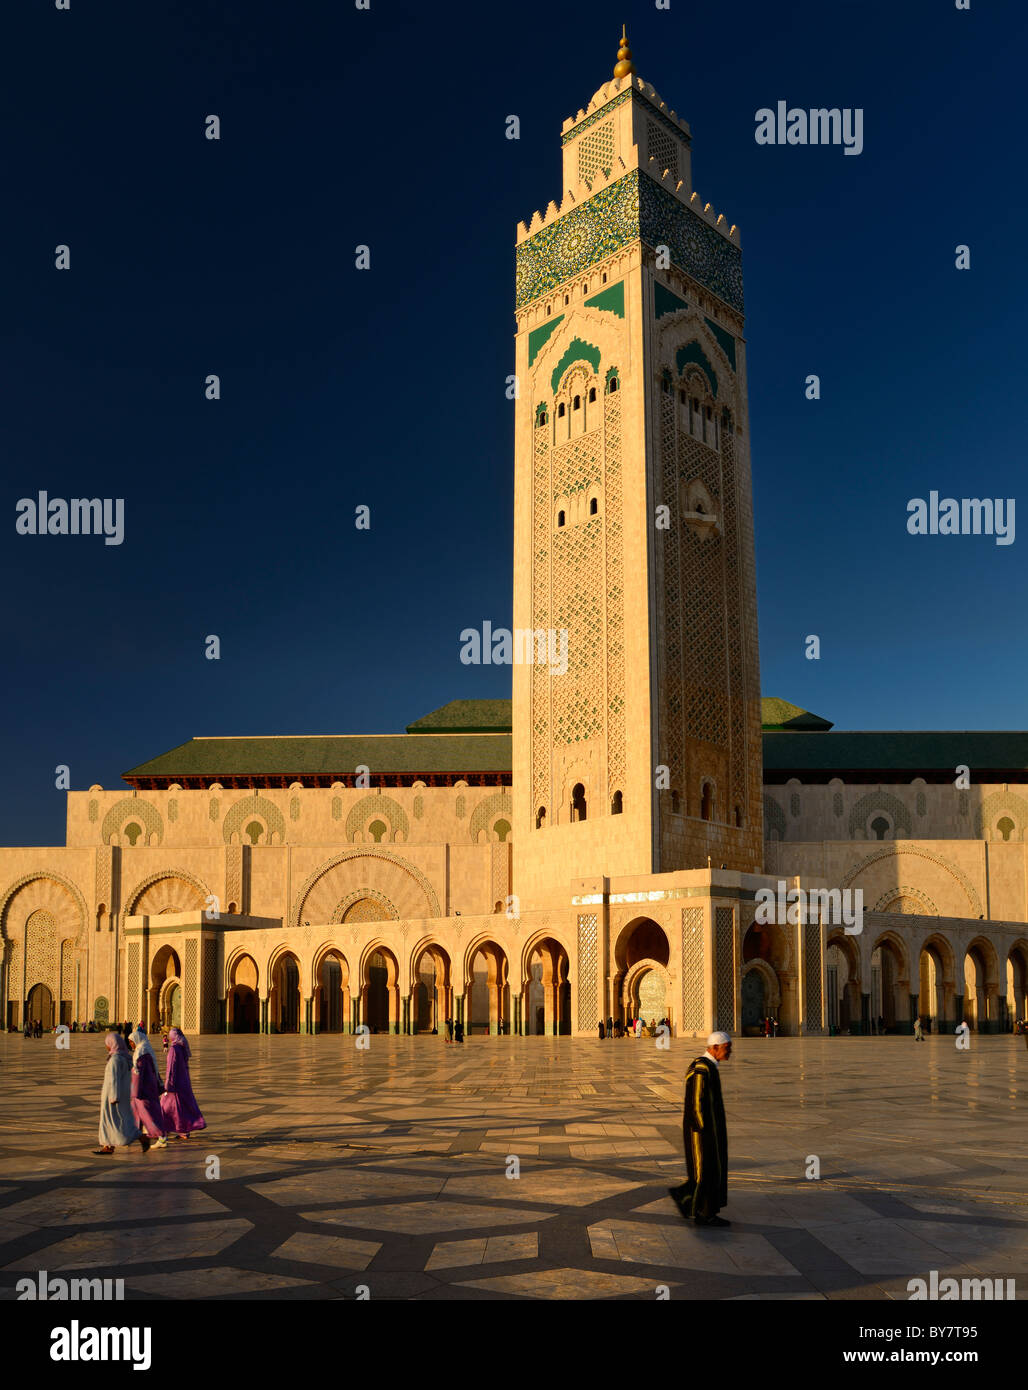 Moroccan man and women walking on the plaza of the Hassan II Mosque Casablanca at sunset with minaret of Moorish architecture in Casablanca Morocco Stock Photo